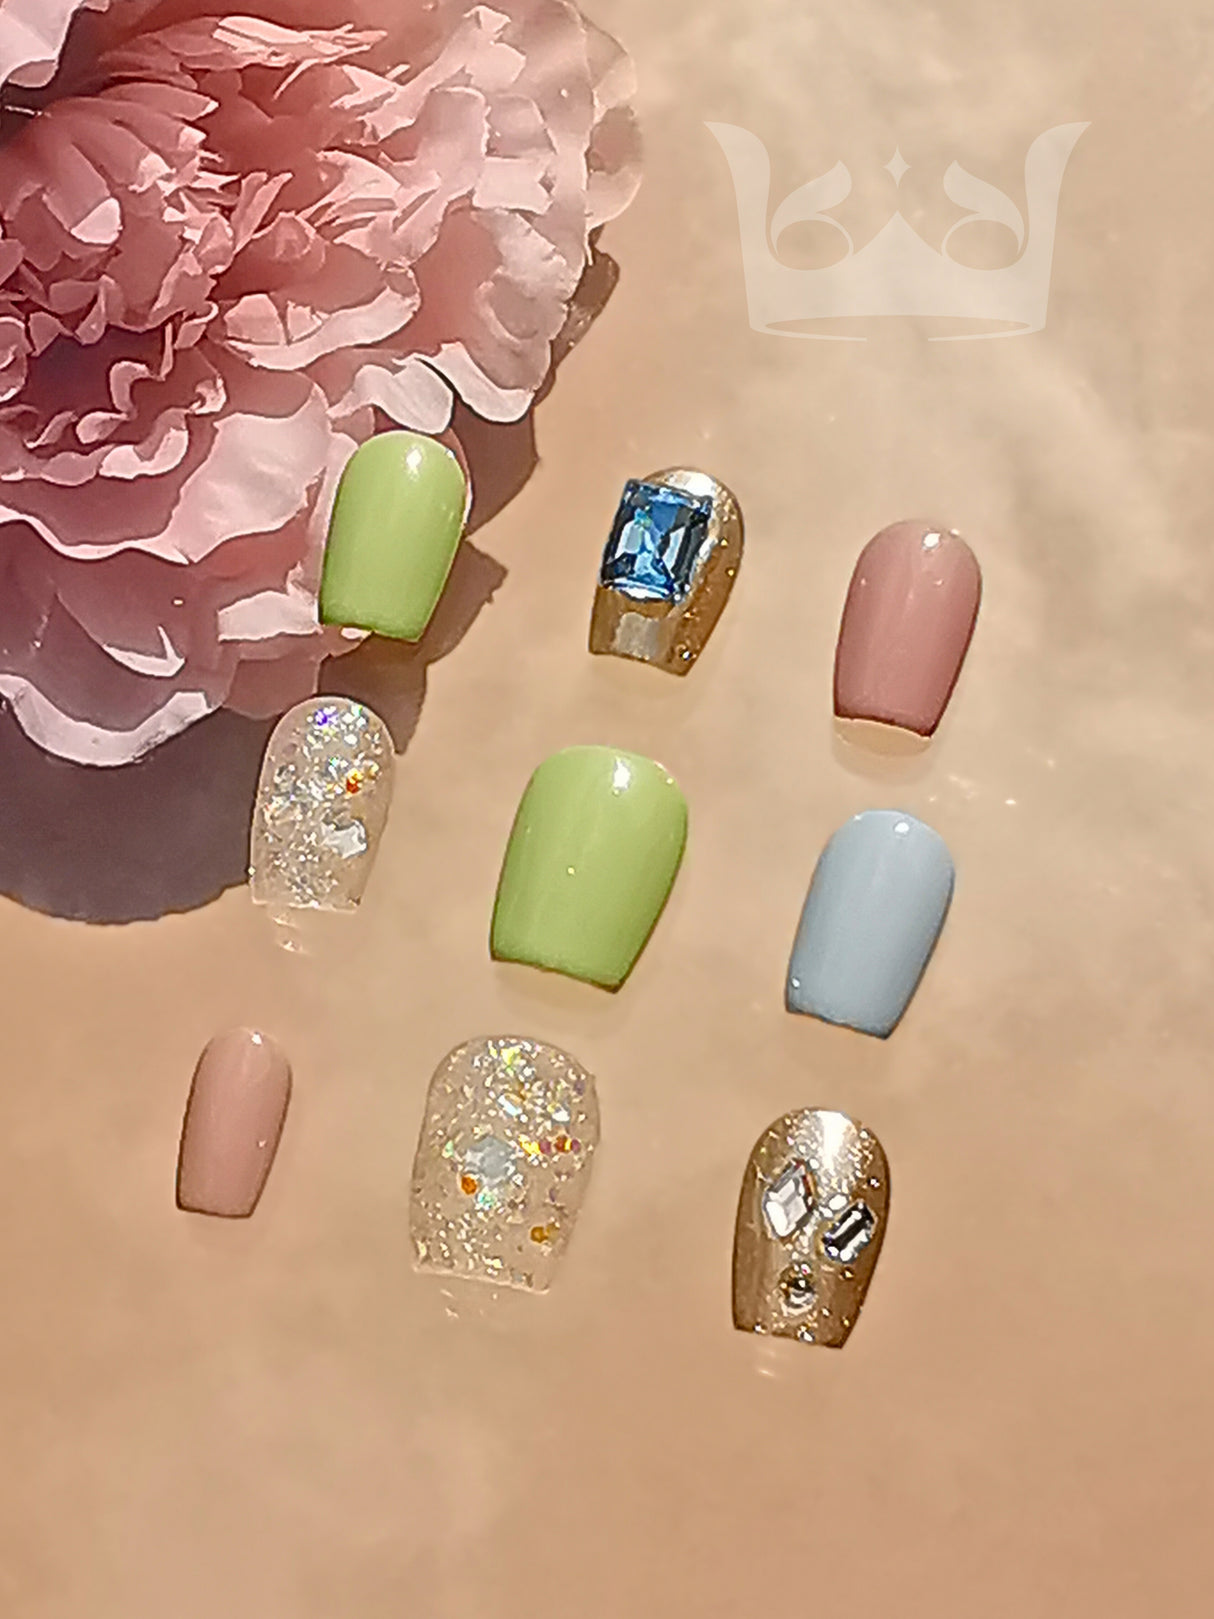 These press-on nails are for nail art and manicure designs, offering a variety of colors, embellishments, and cute elements for personal expression and style. 